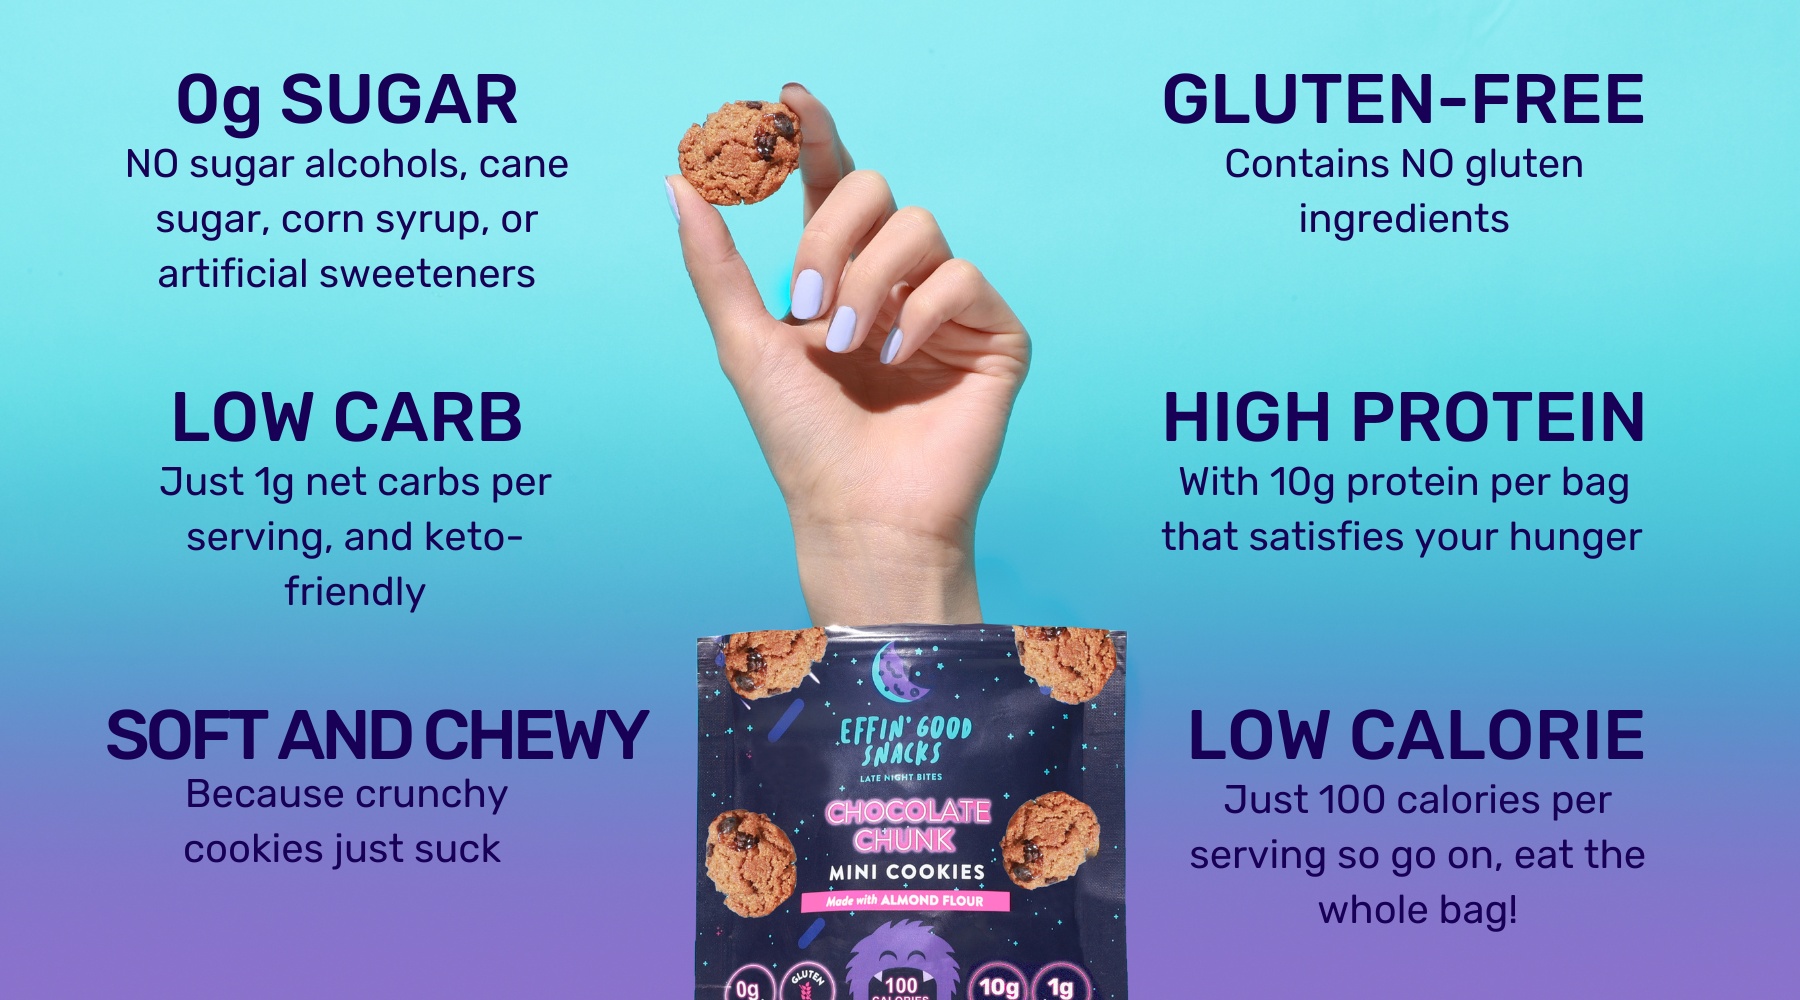 Best keto friendly chocolate chip cookies ingredients. features listed around package.Zero sugar, gluten free, high protein, low calorie, low carb.